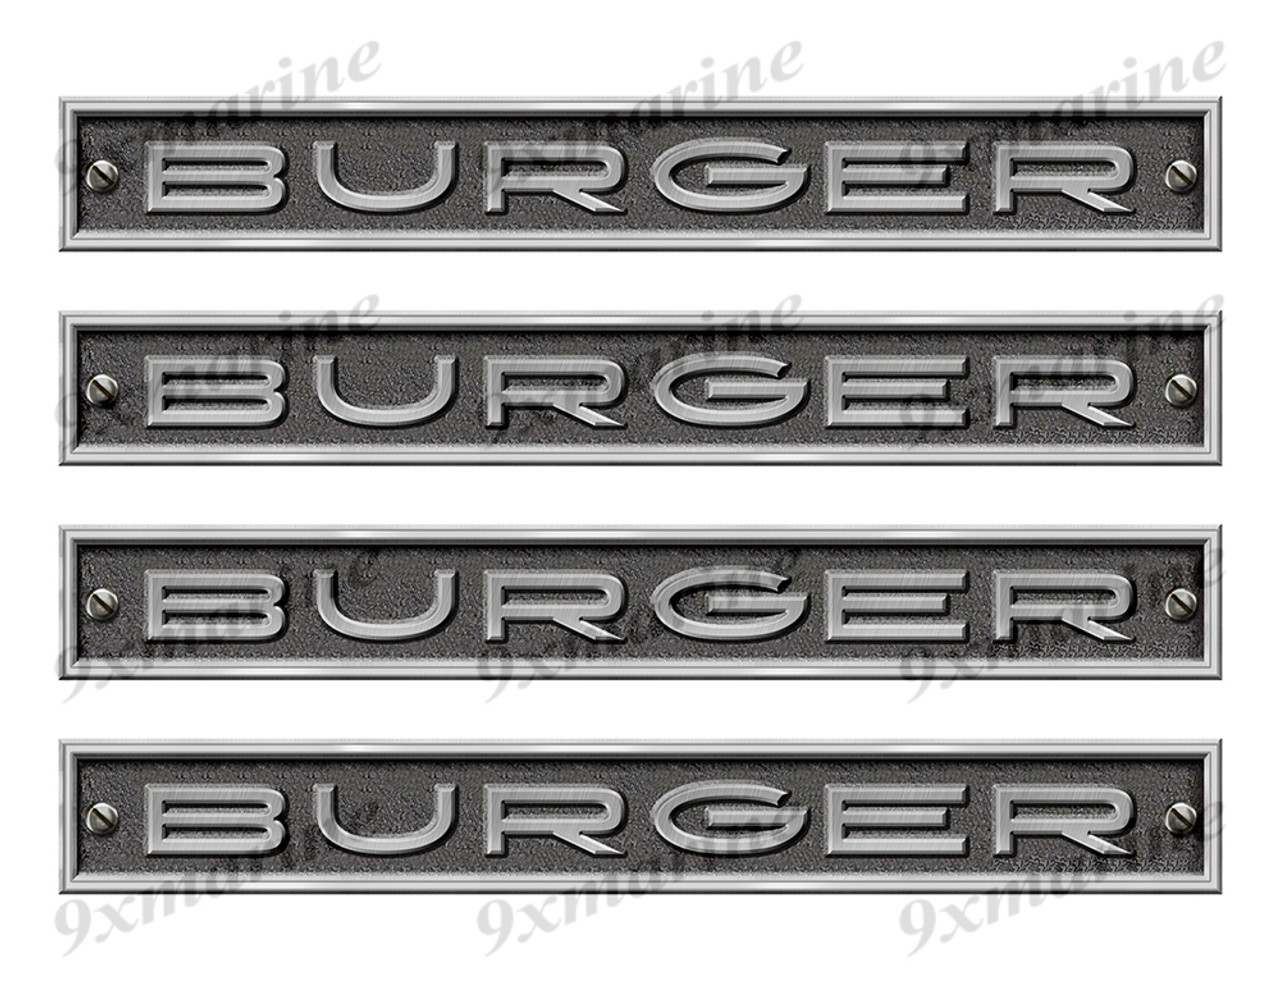 Four Burger Stickers - 10" long set. Replica Name Plate in Vinyl